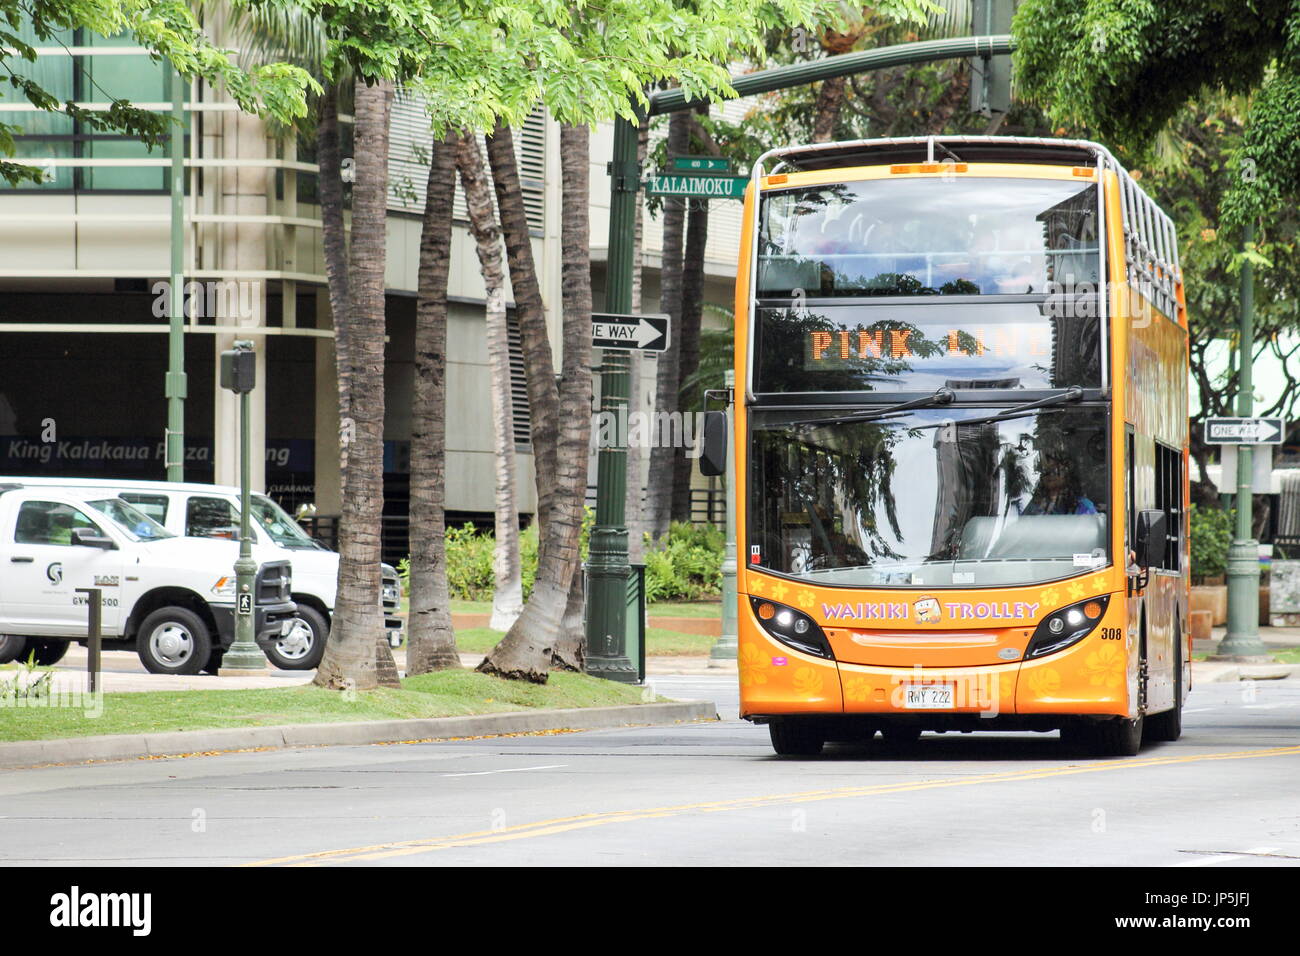 Honolulu, Hawaii - May 25, 2016: Pink Line Waikiki Trolley Bus. The Waikiki  Trolley transport system is the easy, fun and affordable way to experienc  Stock Photo - Alamy